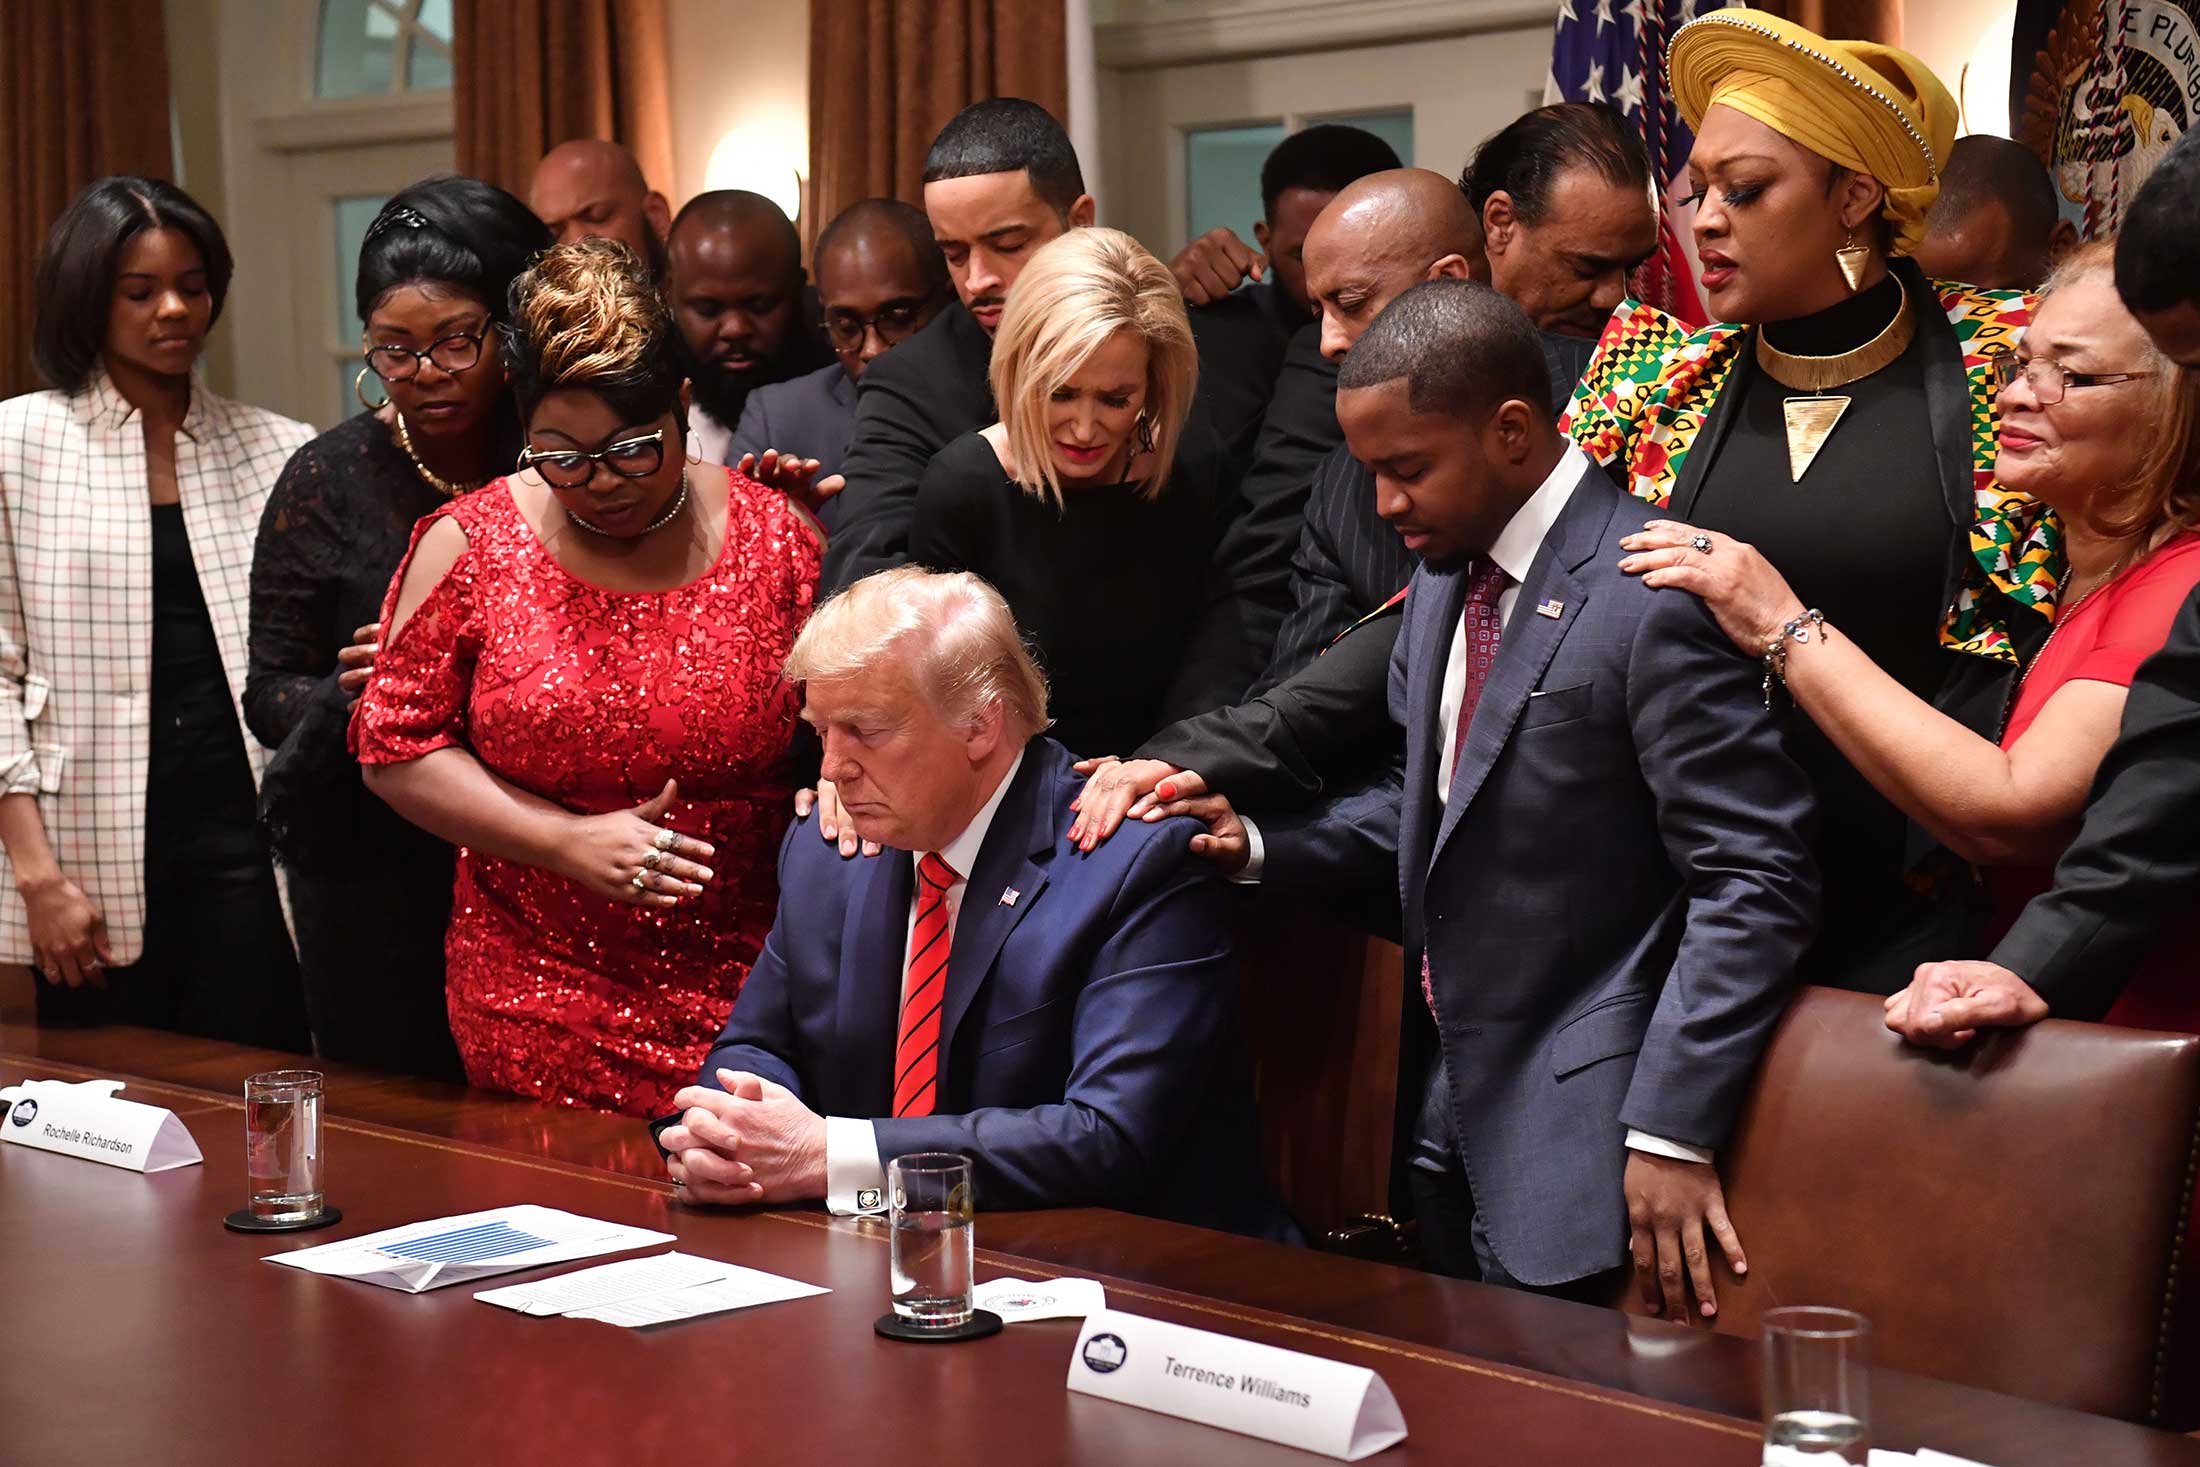 Black supporters pray with President Trump at the White House on Feb. 27.&nbsp;